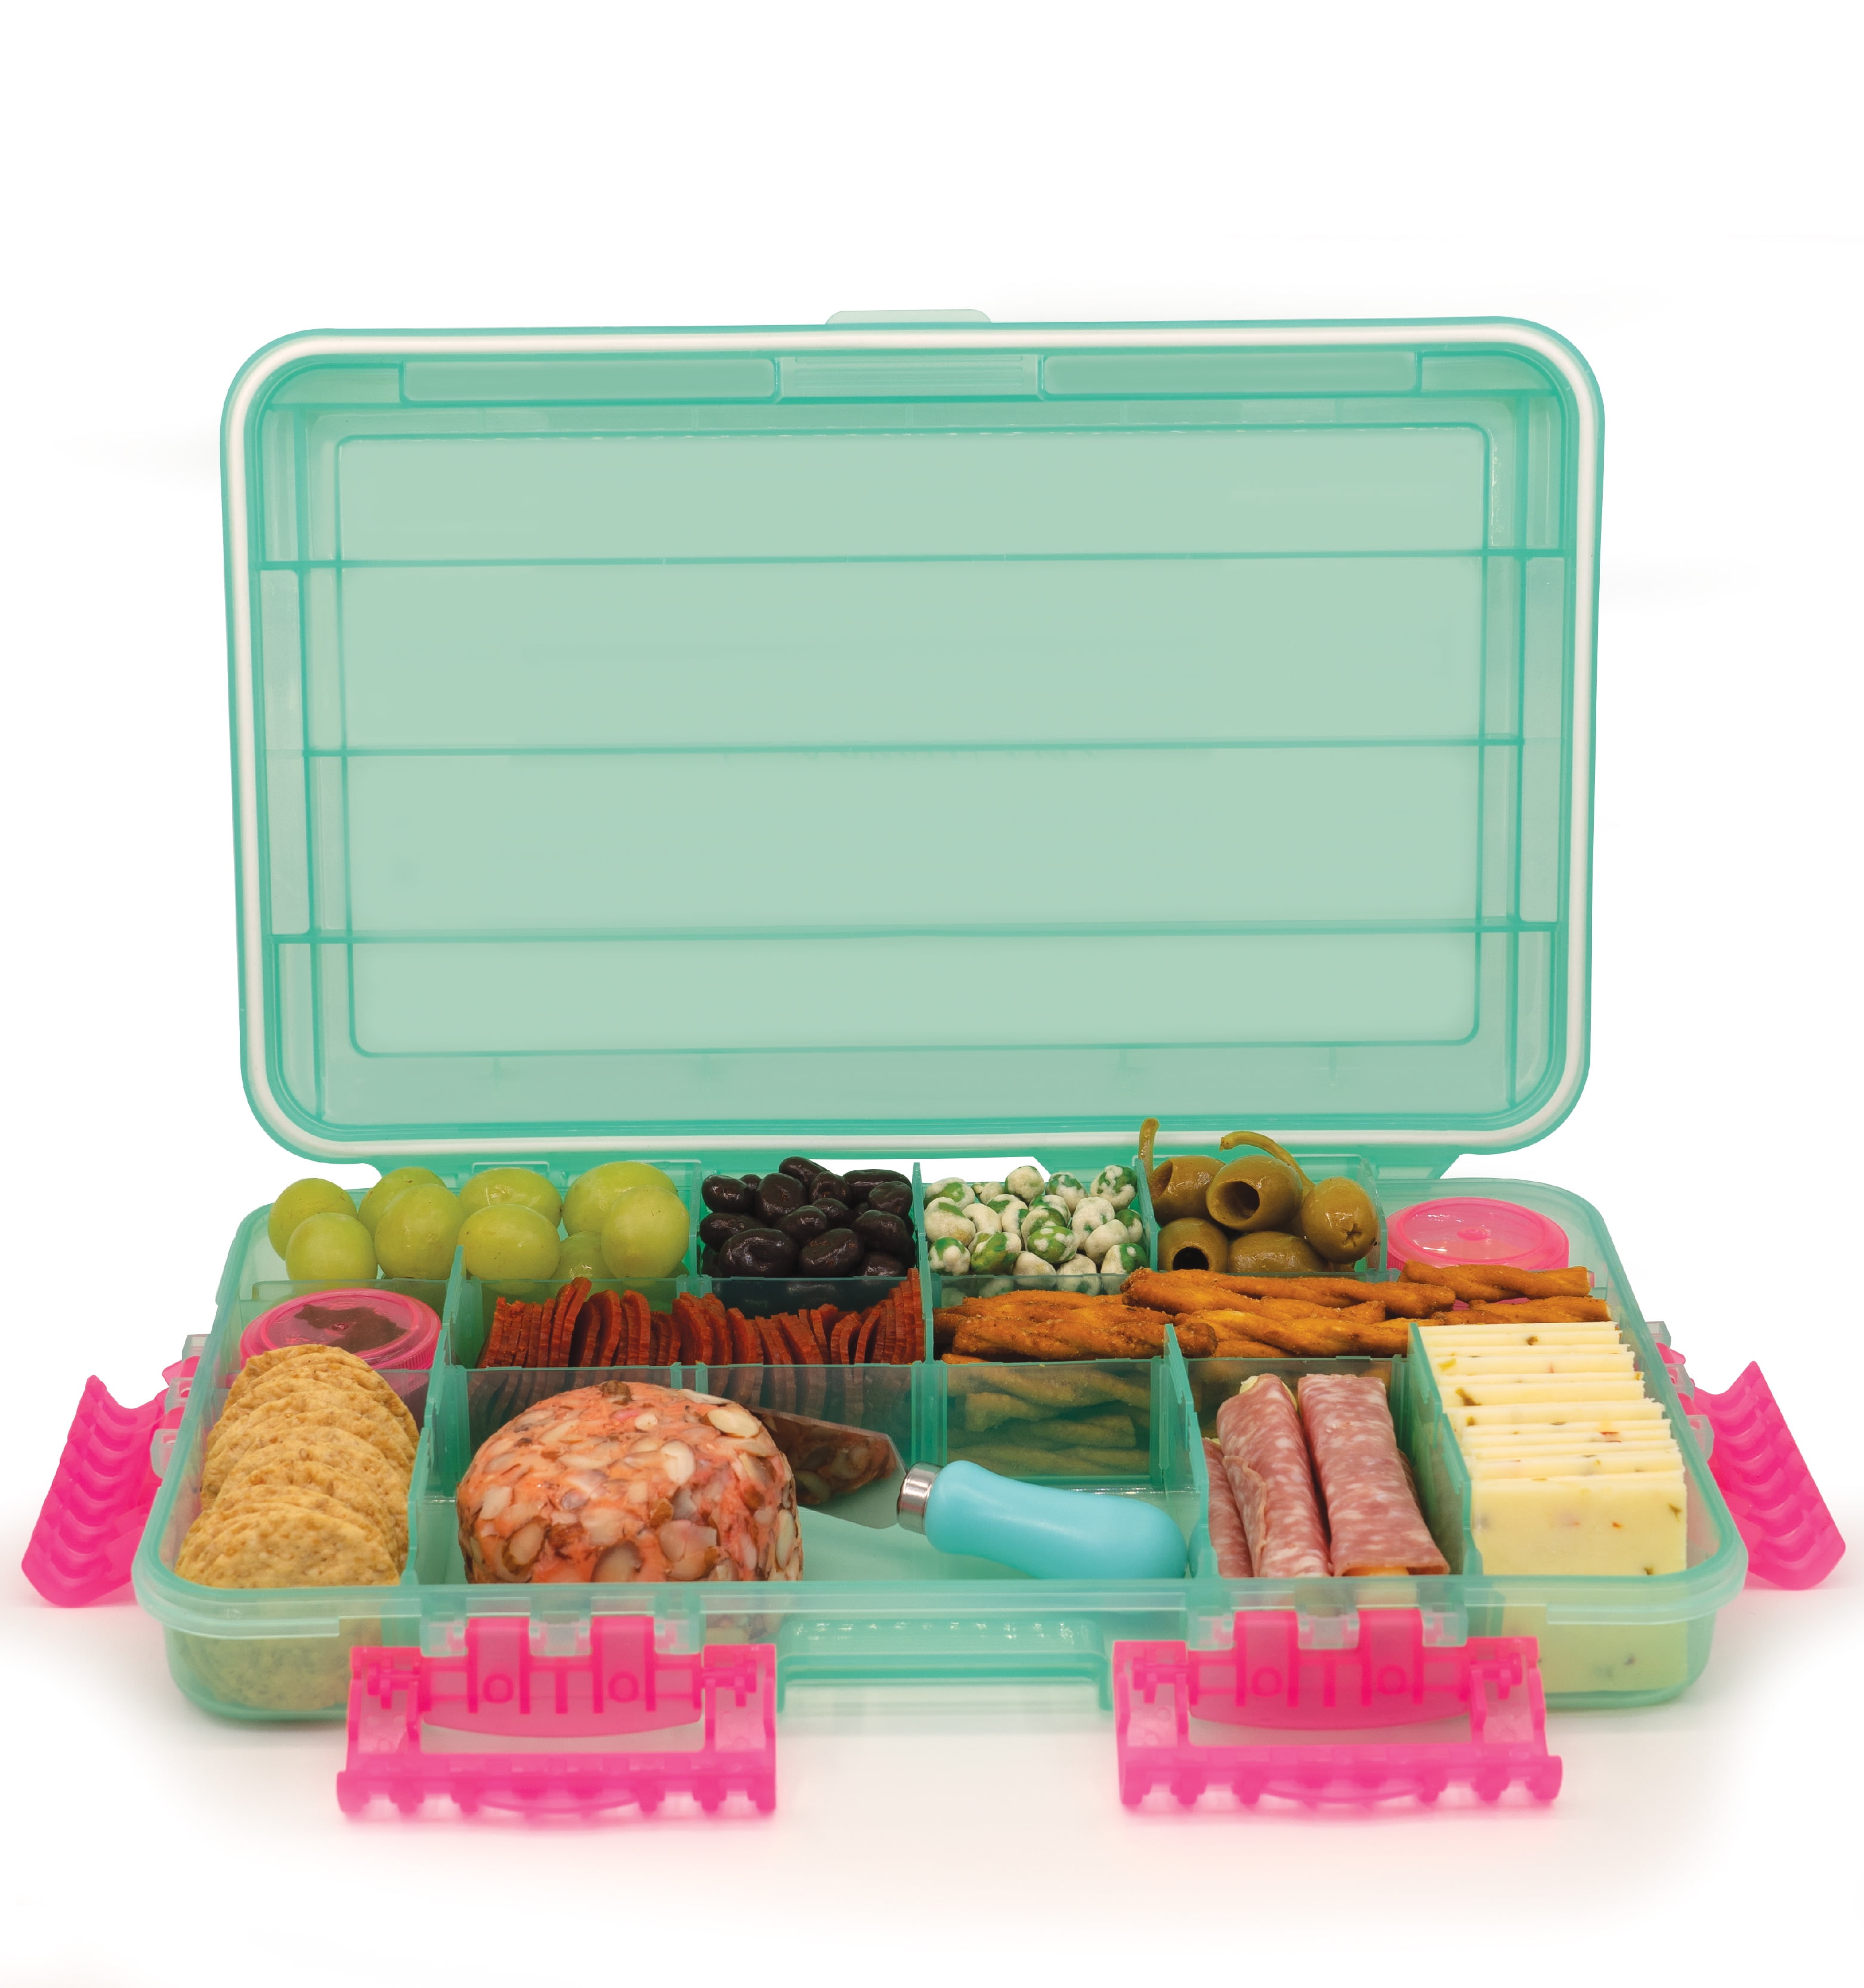 Charcuterie Safe By SubSafe - Waterproof Tackle Box Container